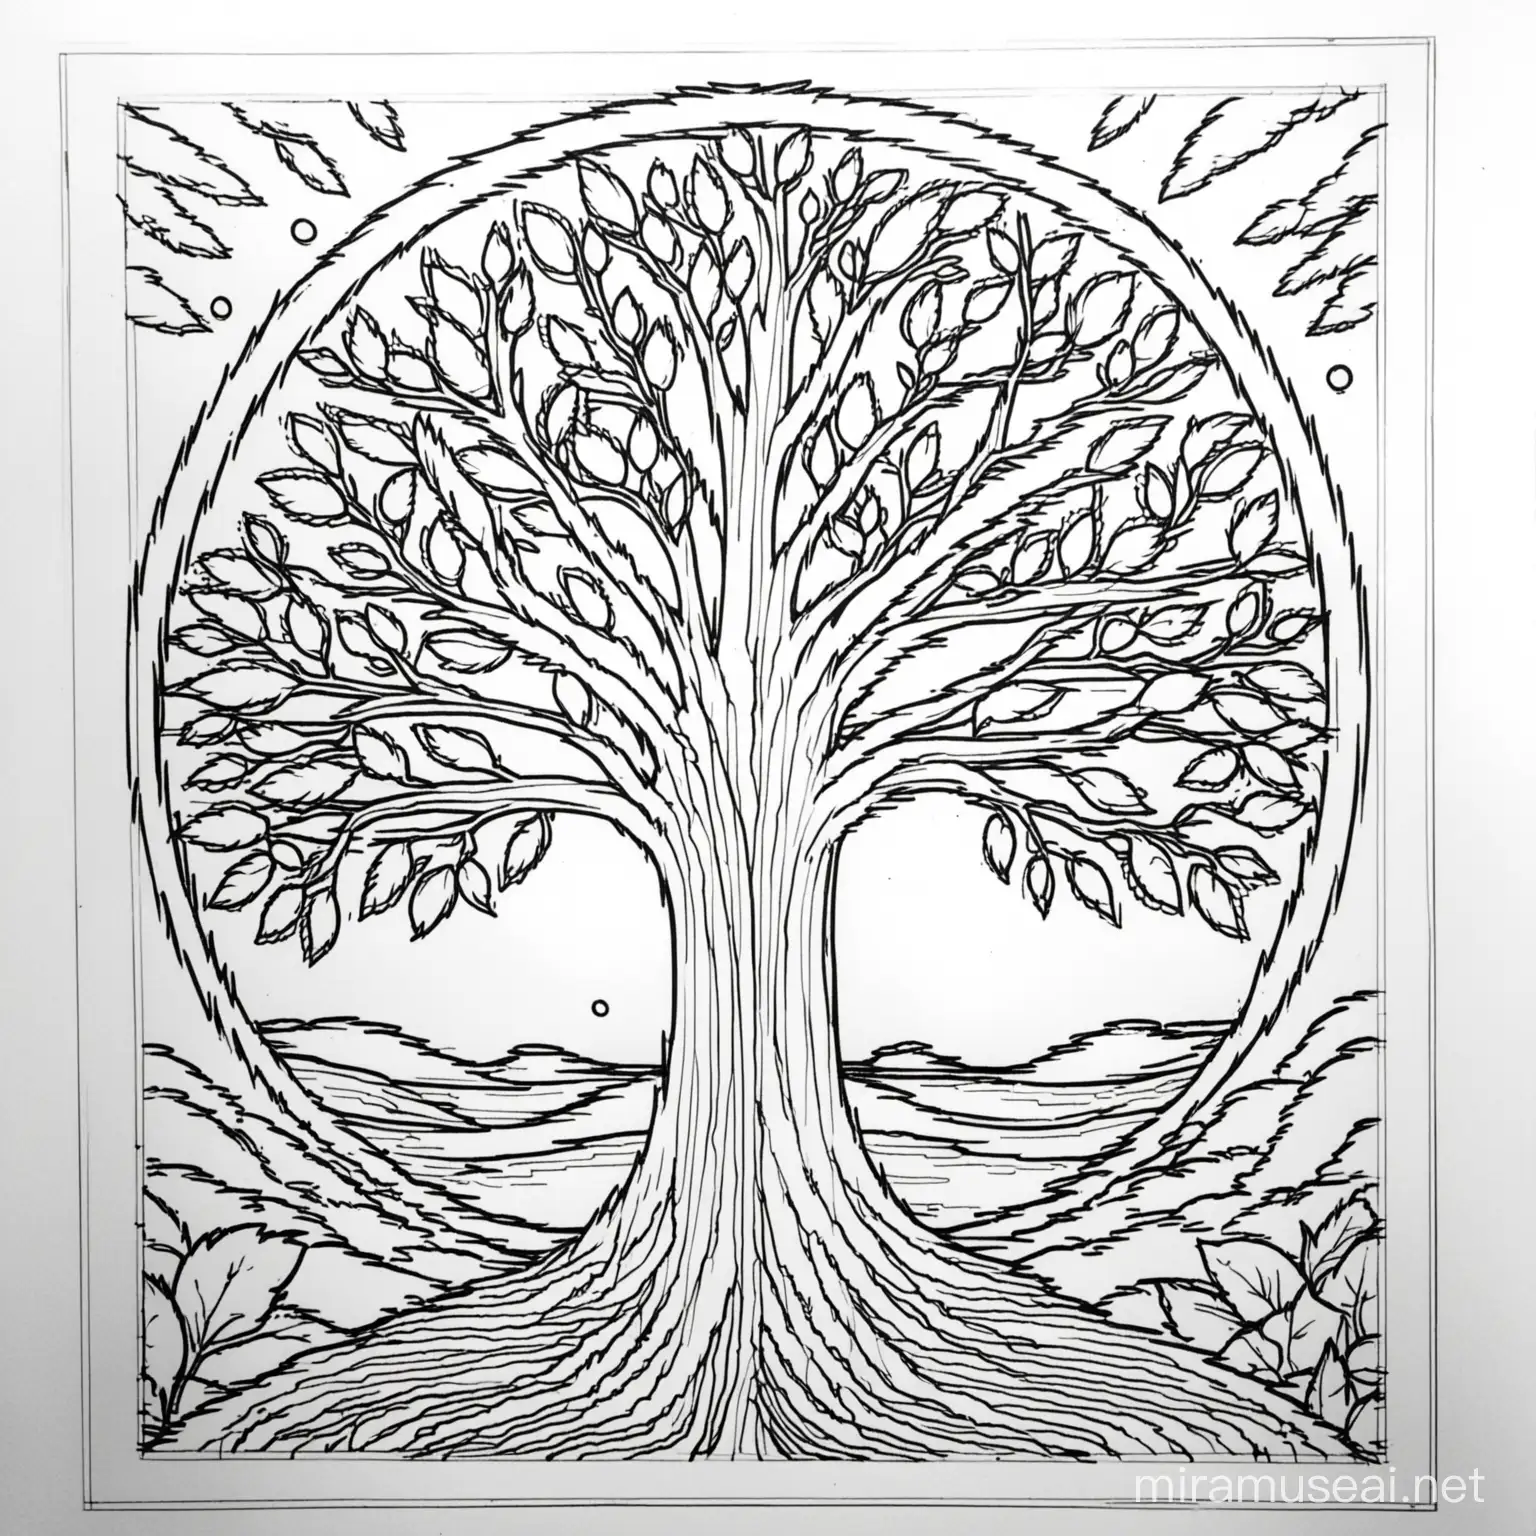 coloring page for 4th grade students. theme is "save water and tree and be kind to the mother earth"